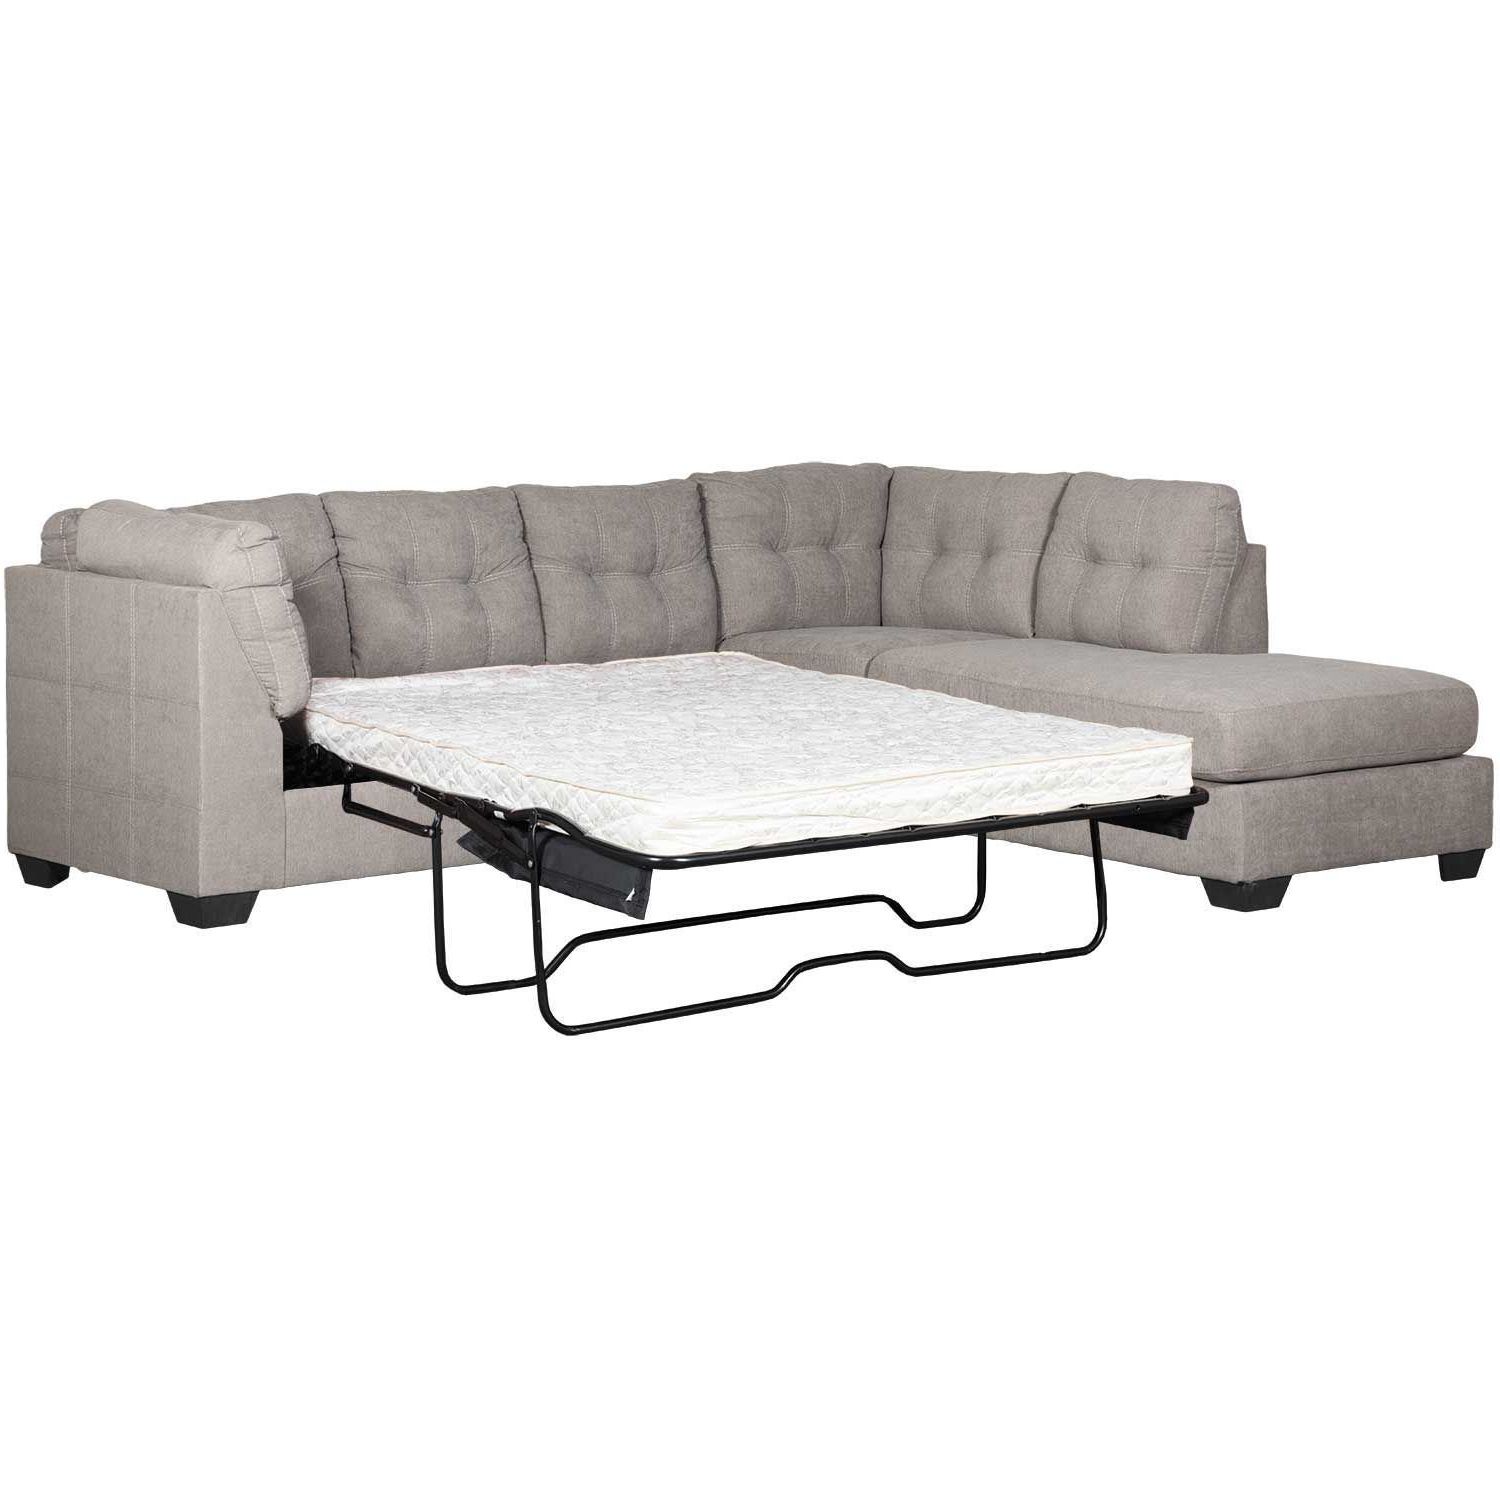 Popular Lucy Dark Grey 2 Piece Sleeper Sectionals With Laf Chaise Regarding Sleeper Sectional (View 14 of 20)